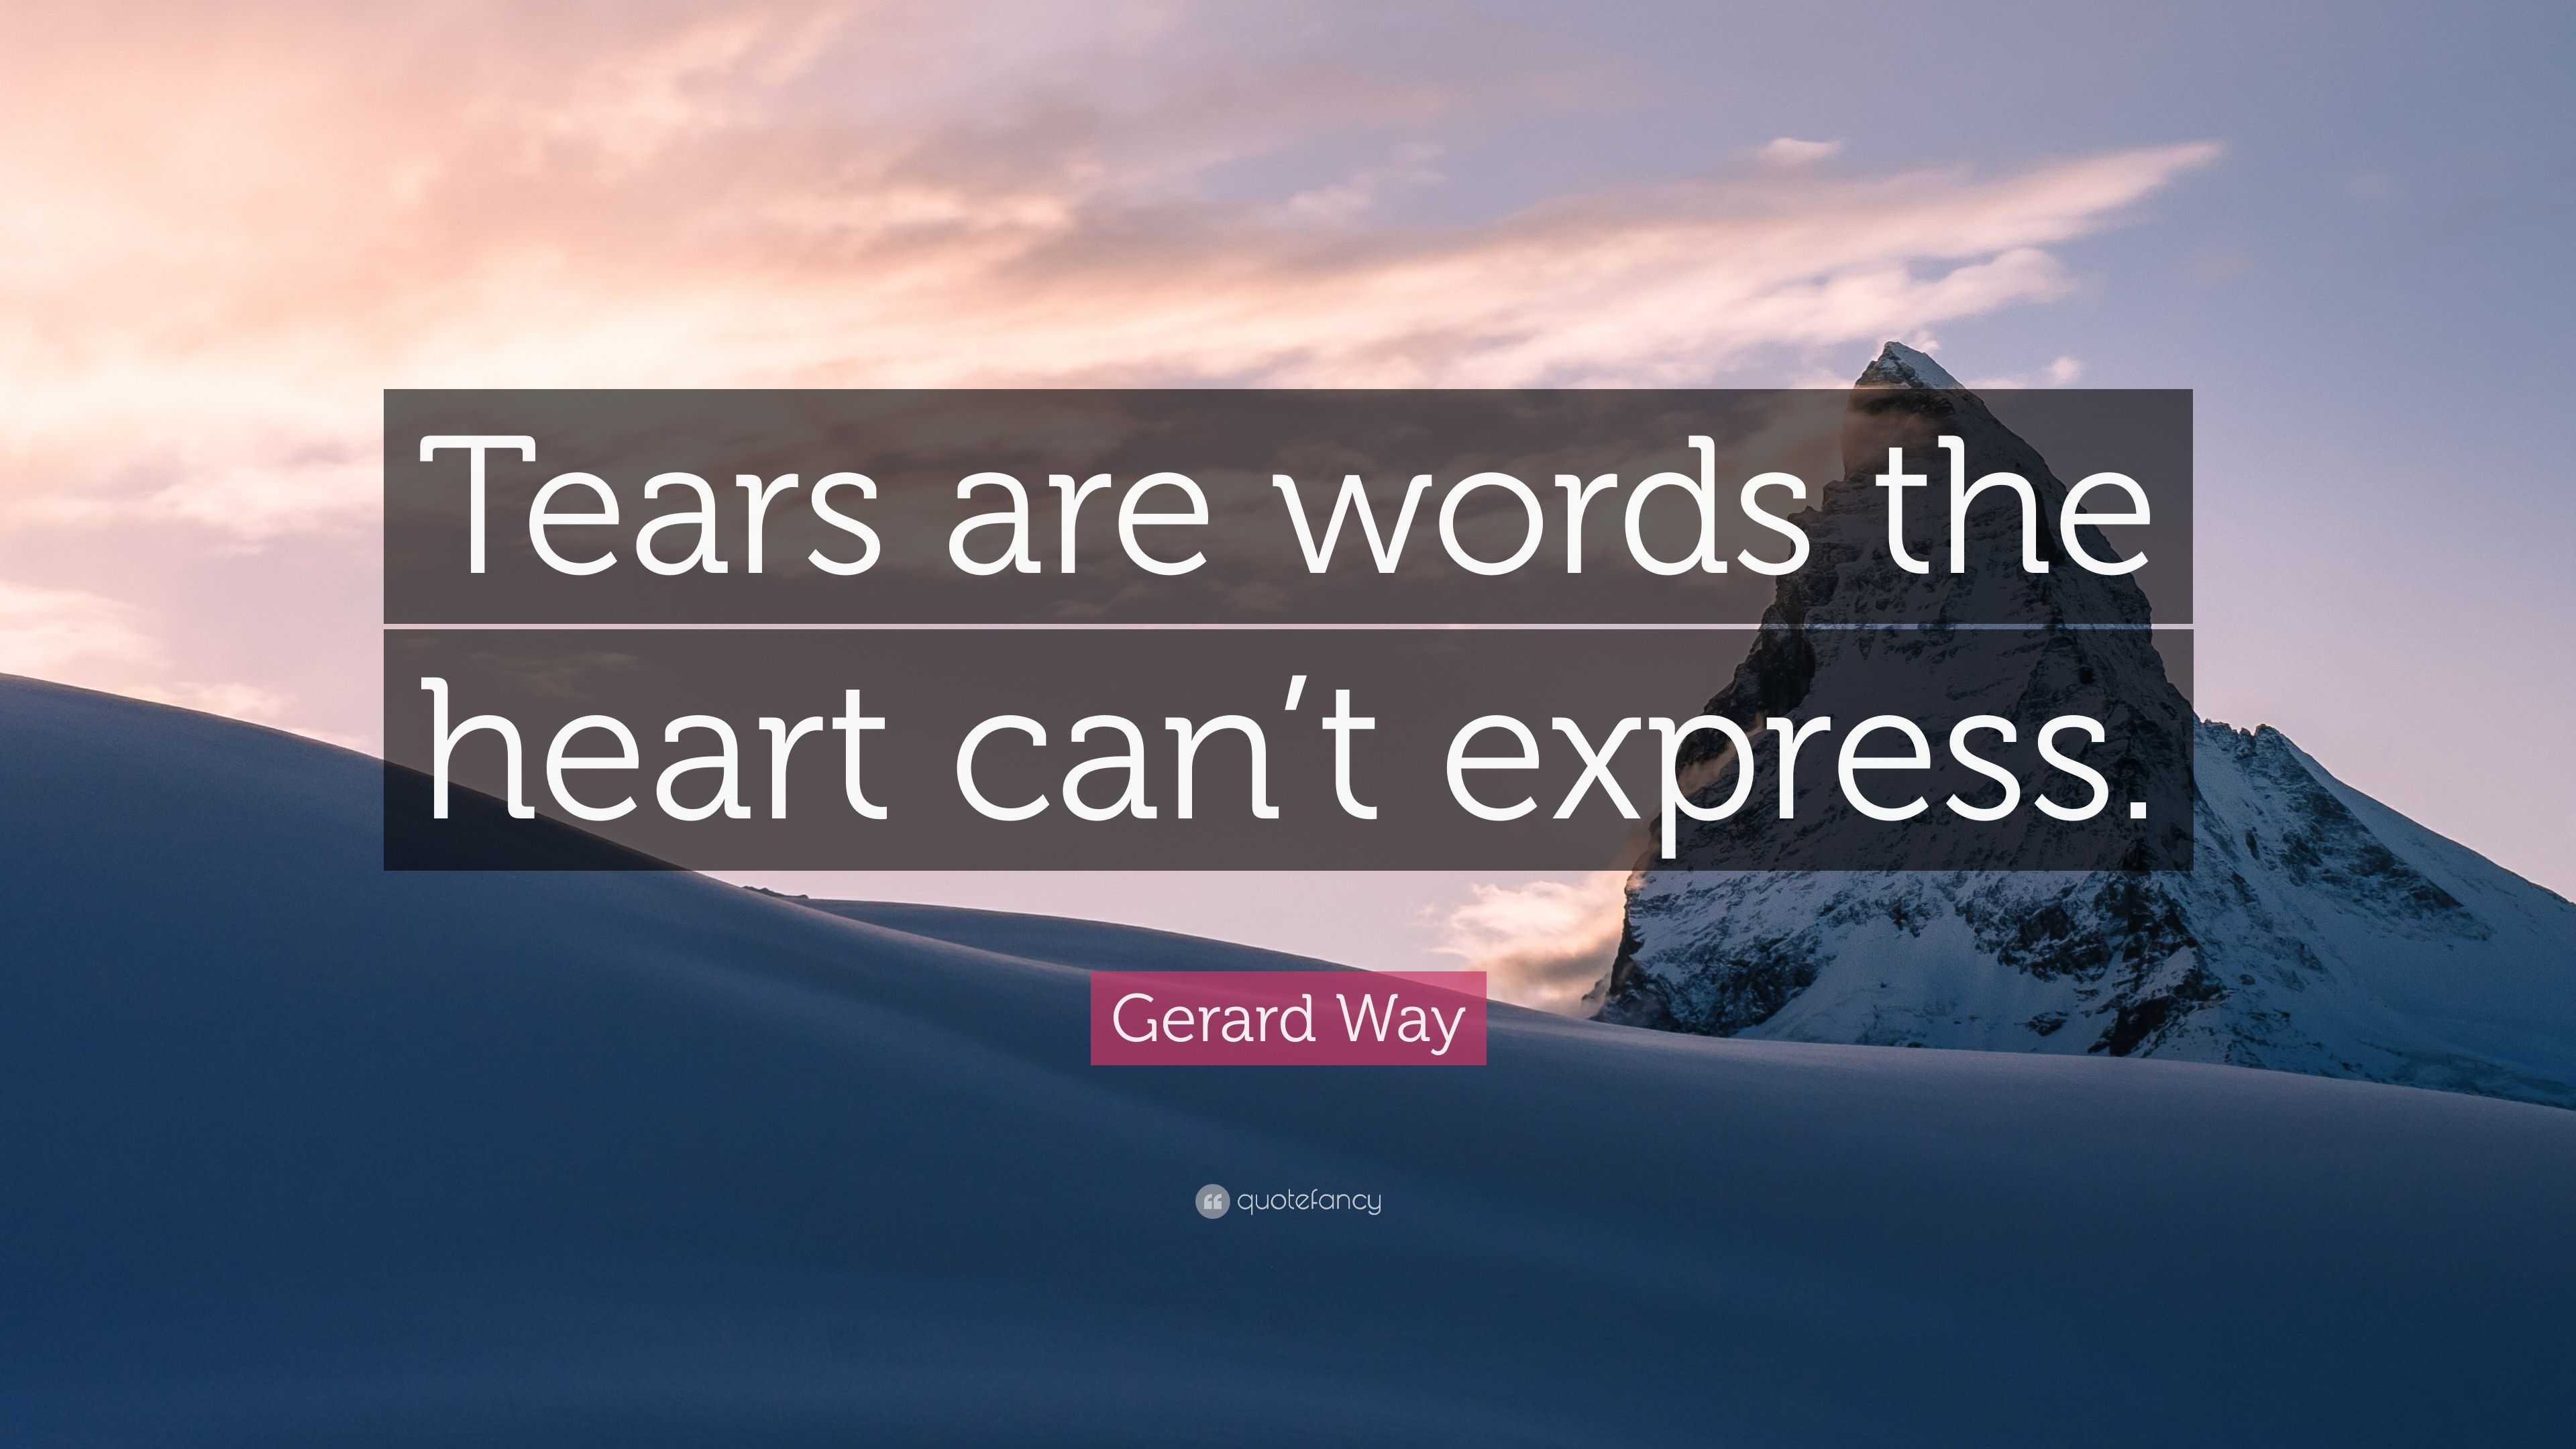 Gerard Way Quote: “Tears are words the heart can’t express.” (12 wallpapers ...3840 x 2160